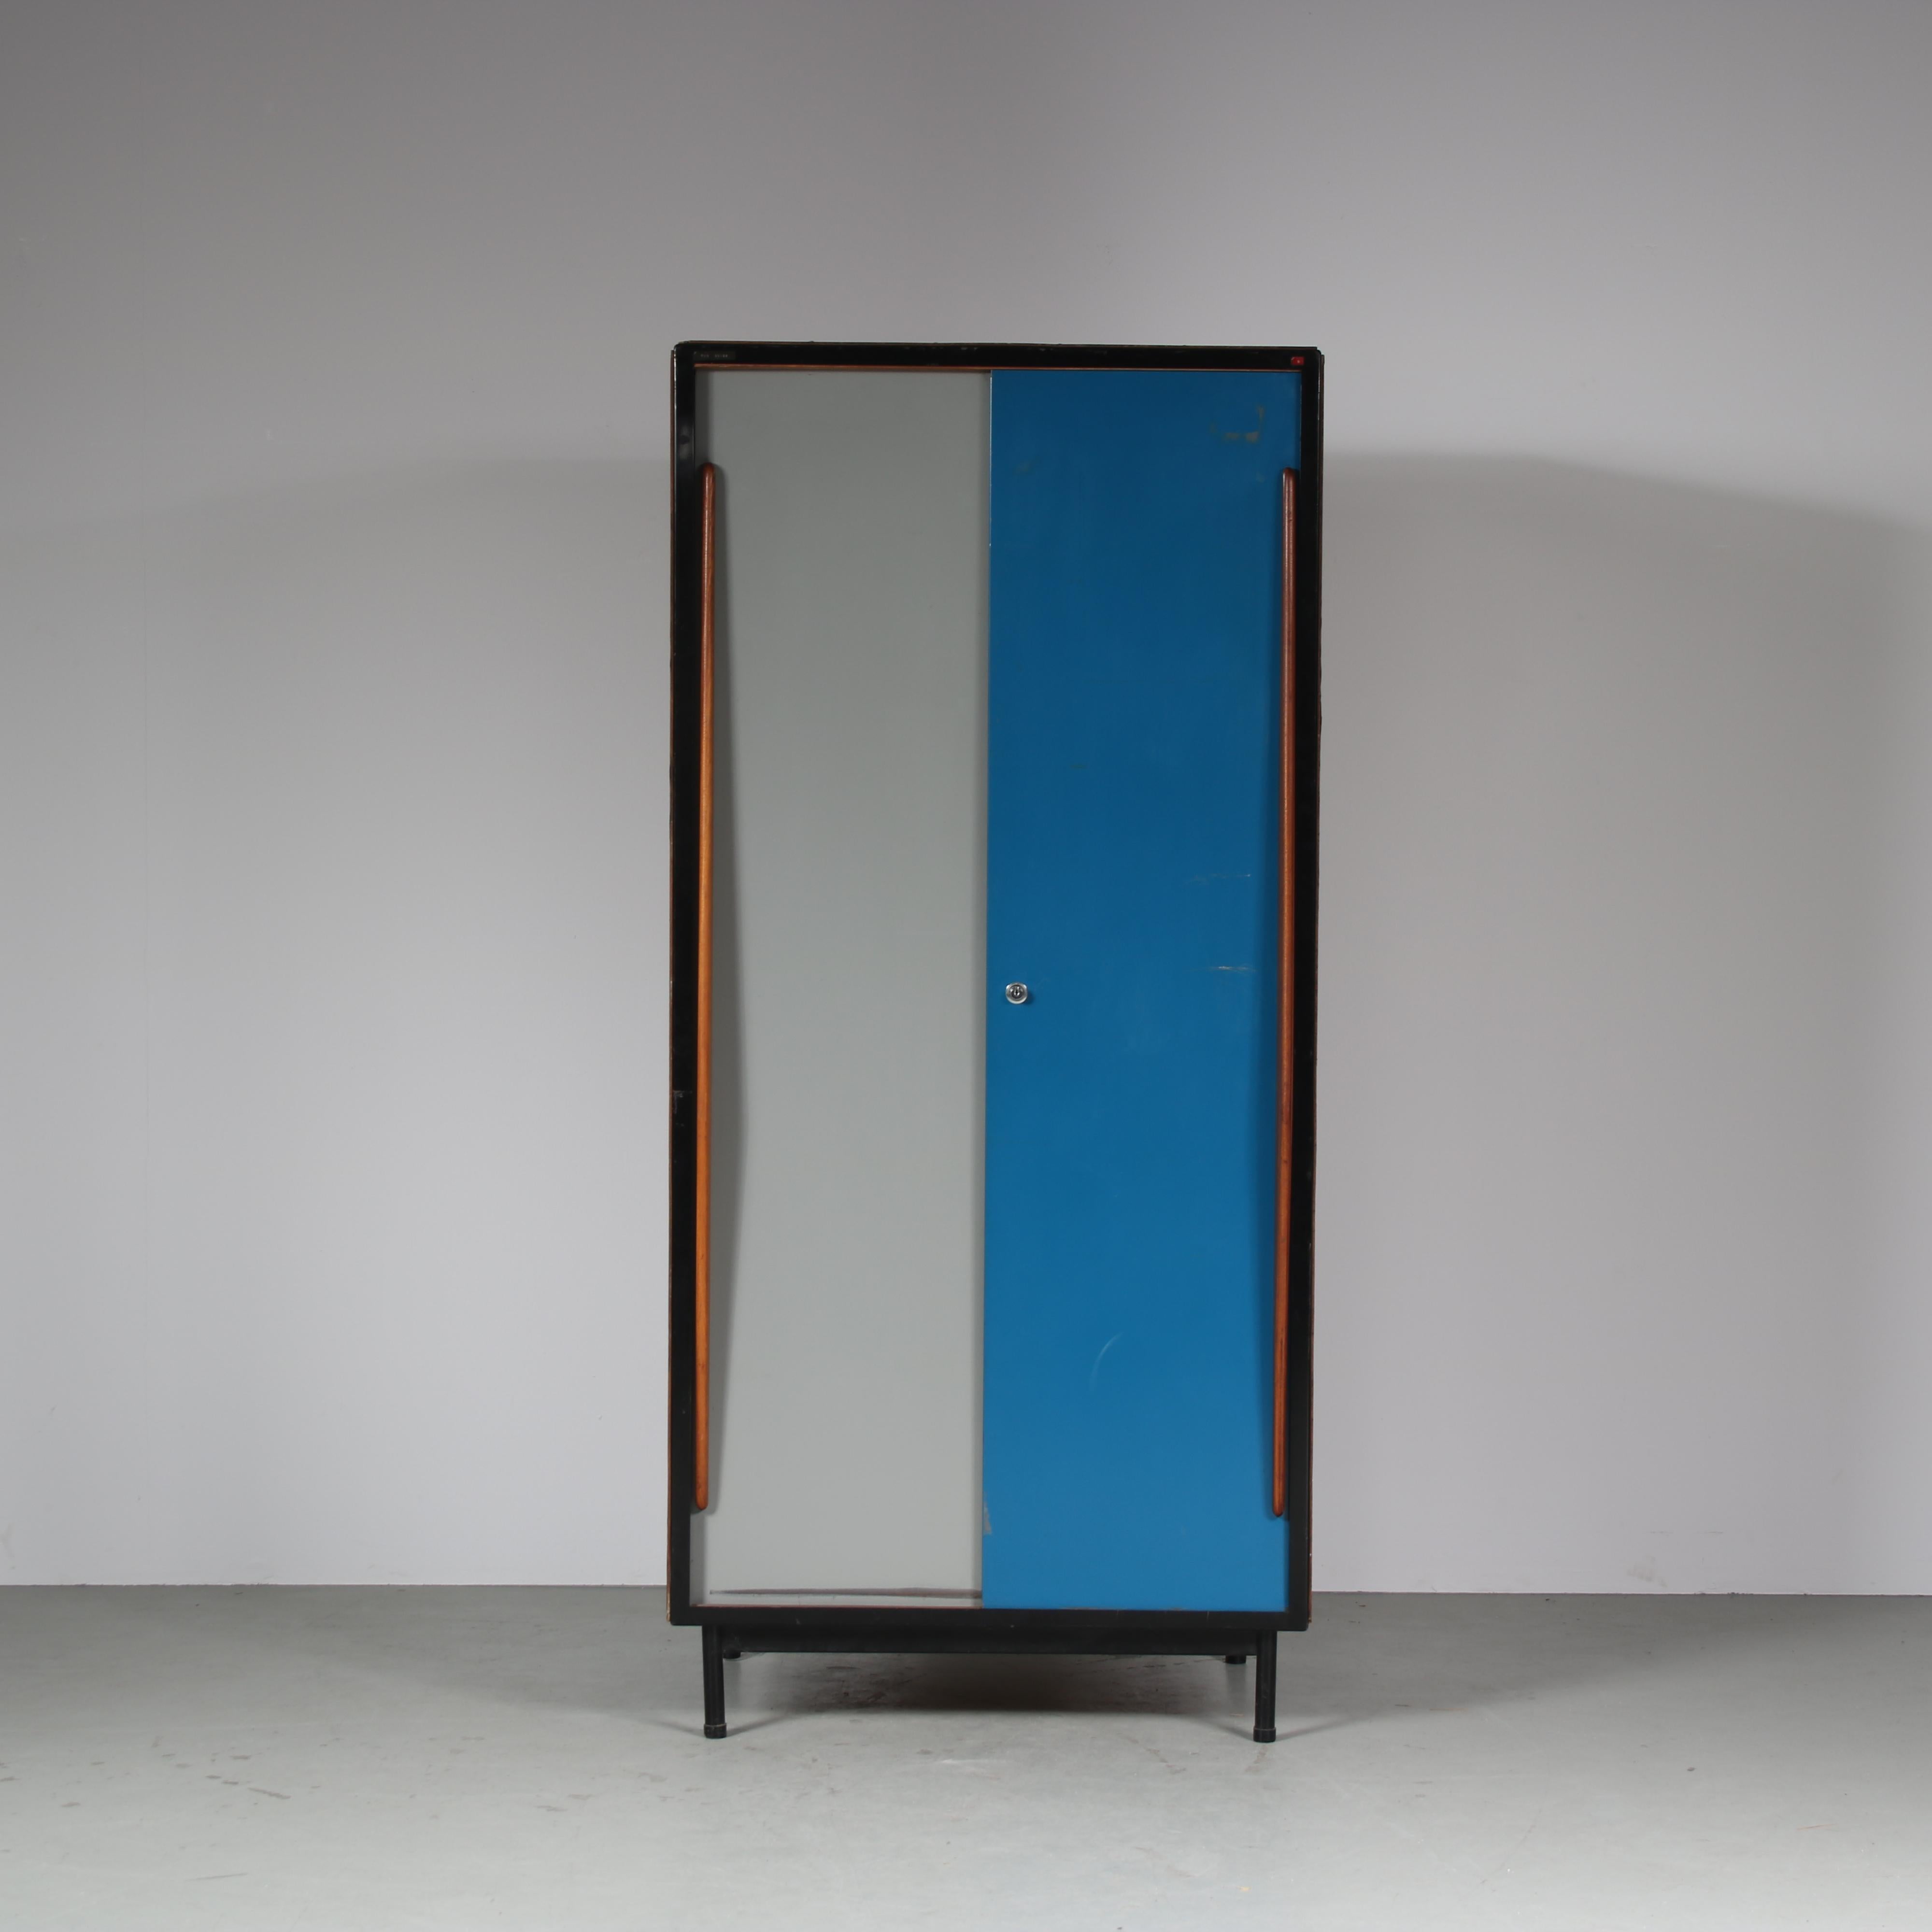 A fantastic wardrobe designed by Willy Van Der Meeren, manufactured by Tubax in Belgium in 1952.

This eye-catching, rare piece is made of beautiful quality wood on a black metal structure. The large metal sliding doors are executed in two different